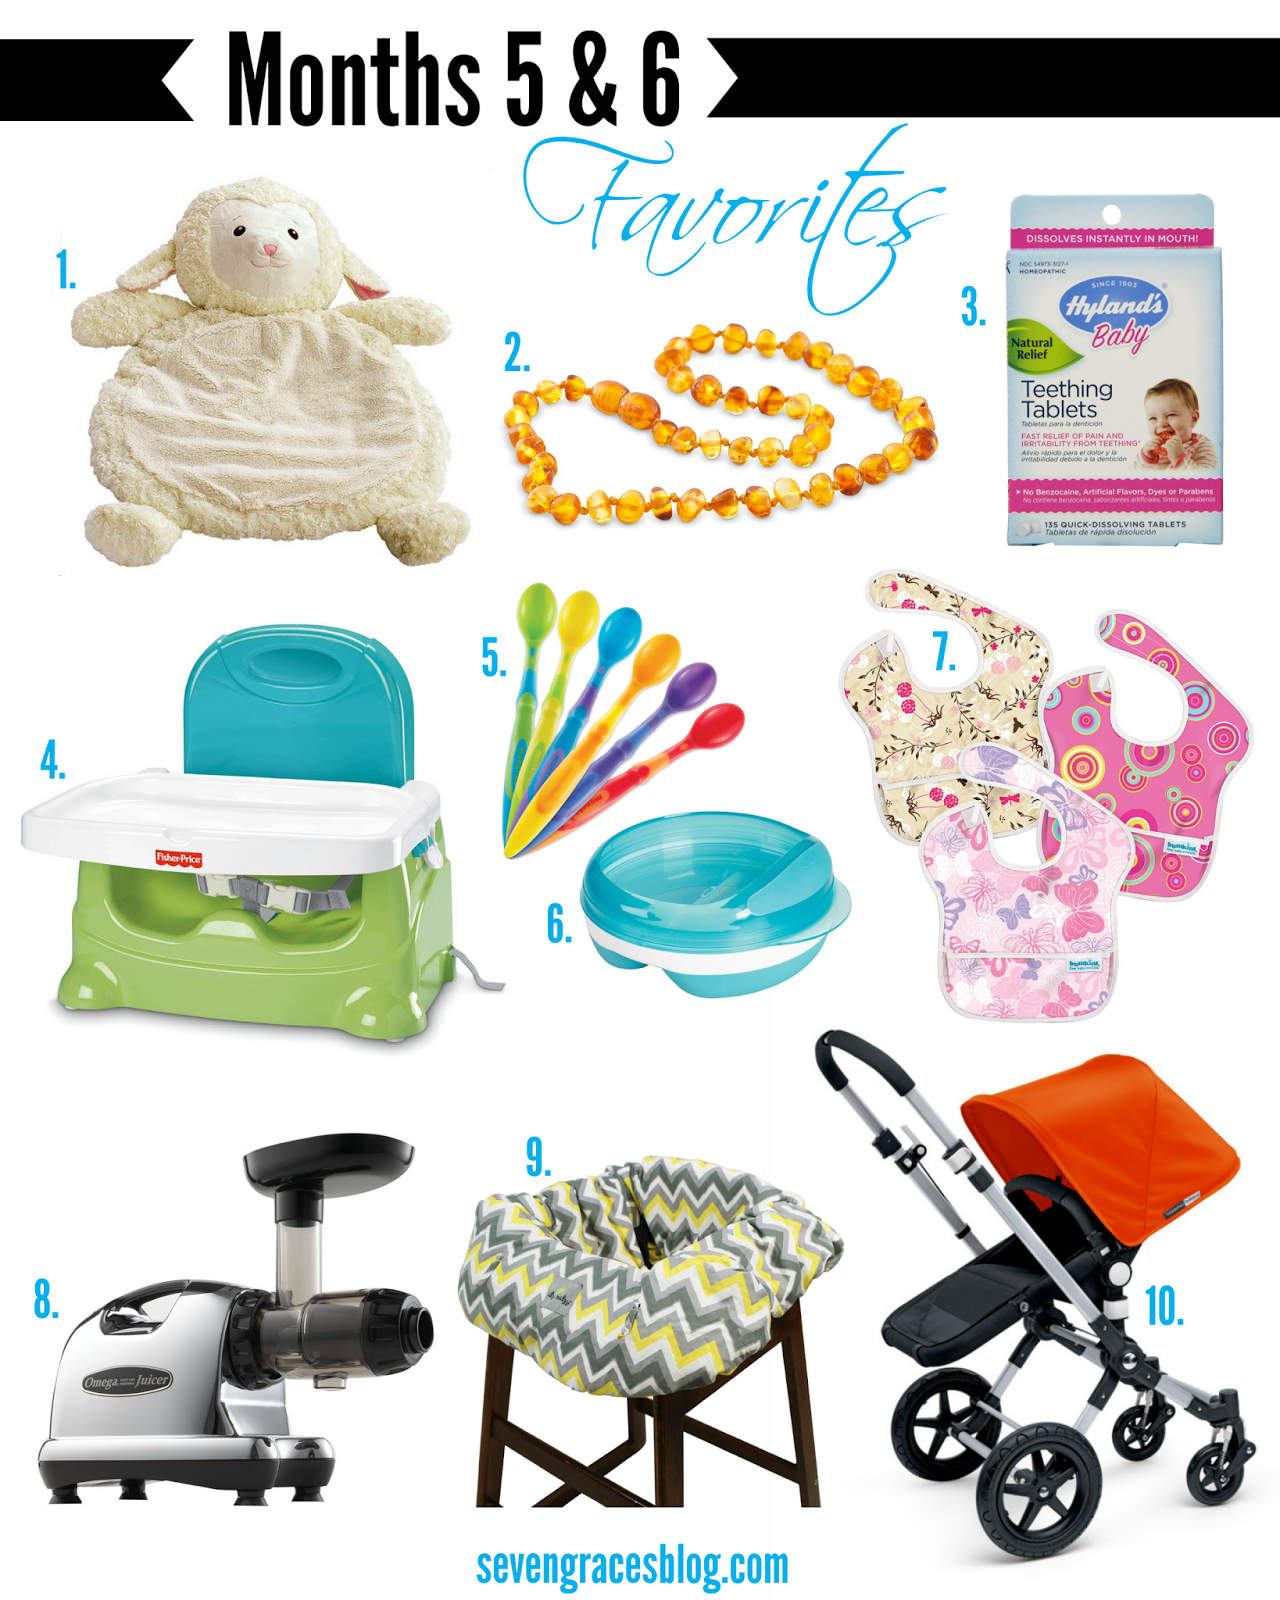 Top 10 Baby Items for Months 5 &  6: Teething &  Feeding